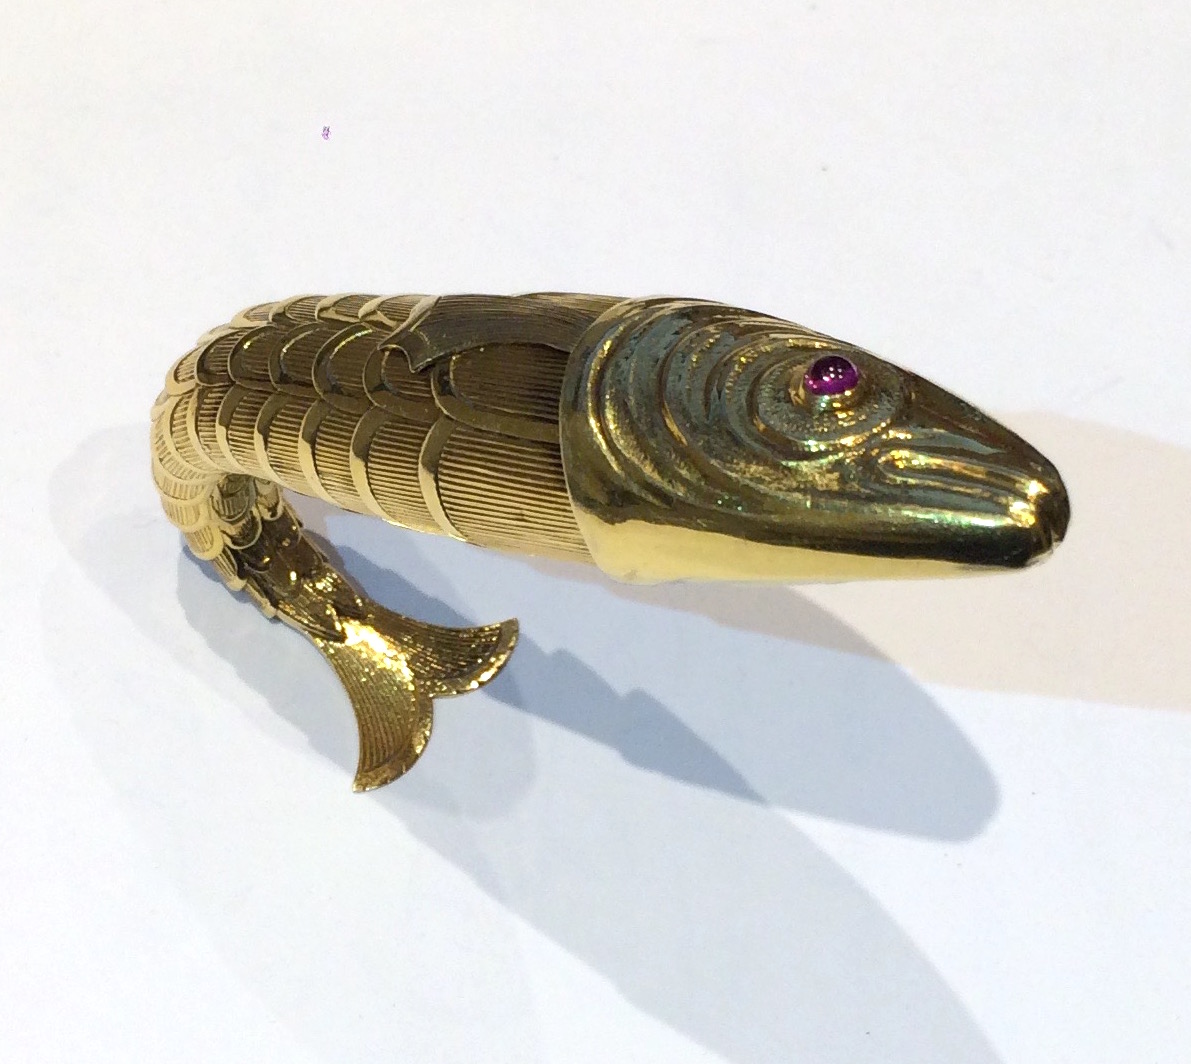 Jean Schlumberger, Paris, famous articulated “fish” lighter, 18K gold body and tail composed of striated and scallop edged scales, set with two cabochon sapphires for eyes, one pink and one blue, signed: Schlumberger, Modele Depose, French Eagle’s head touch mark for 18k gold (3x), Crab mark for silver made in the French provinces, (lighter insert only) c. 1939-42   Model illustrated: The Jewels of Jean Schlumberger, catalogue no. 50